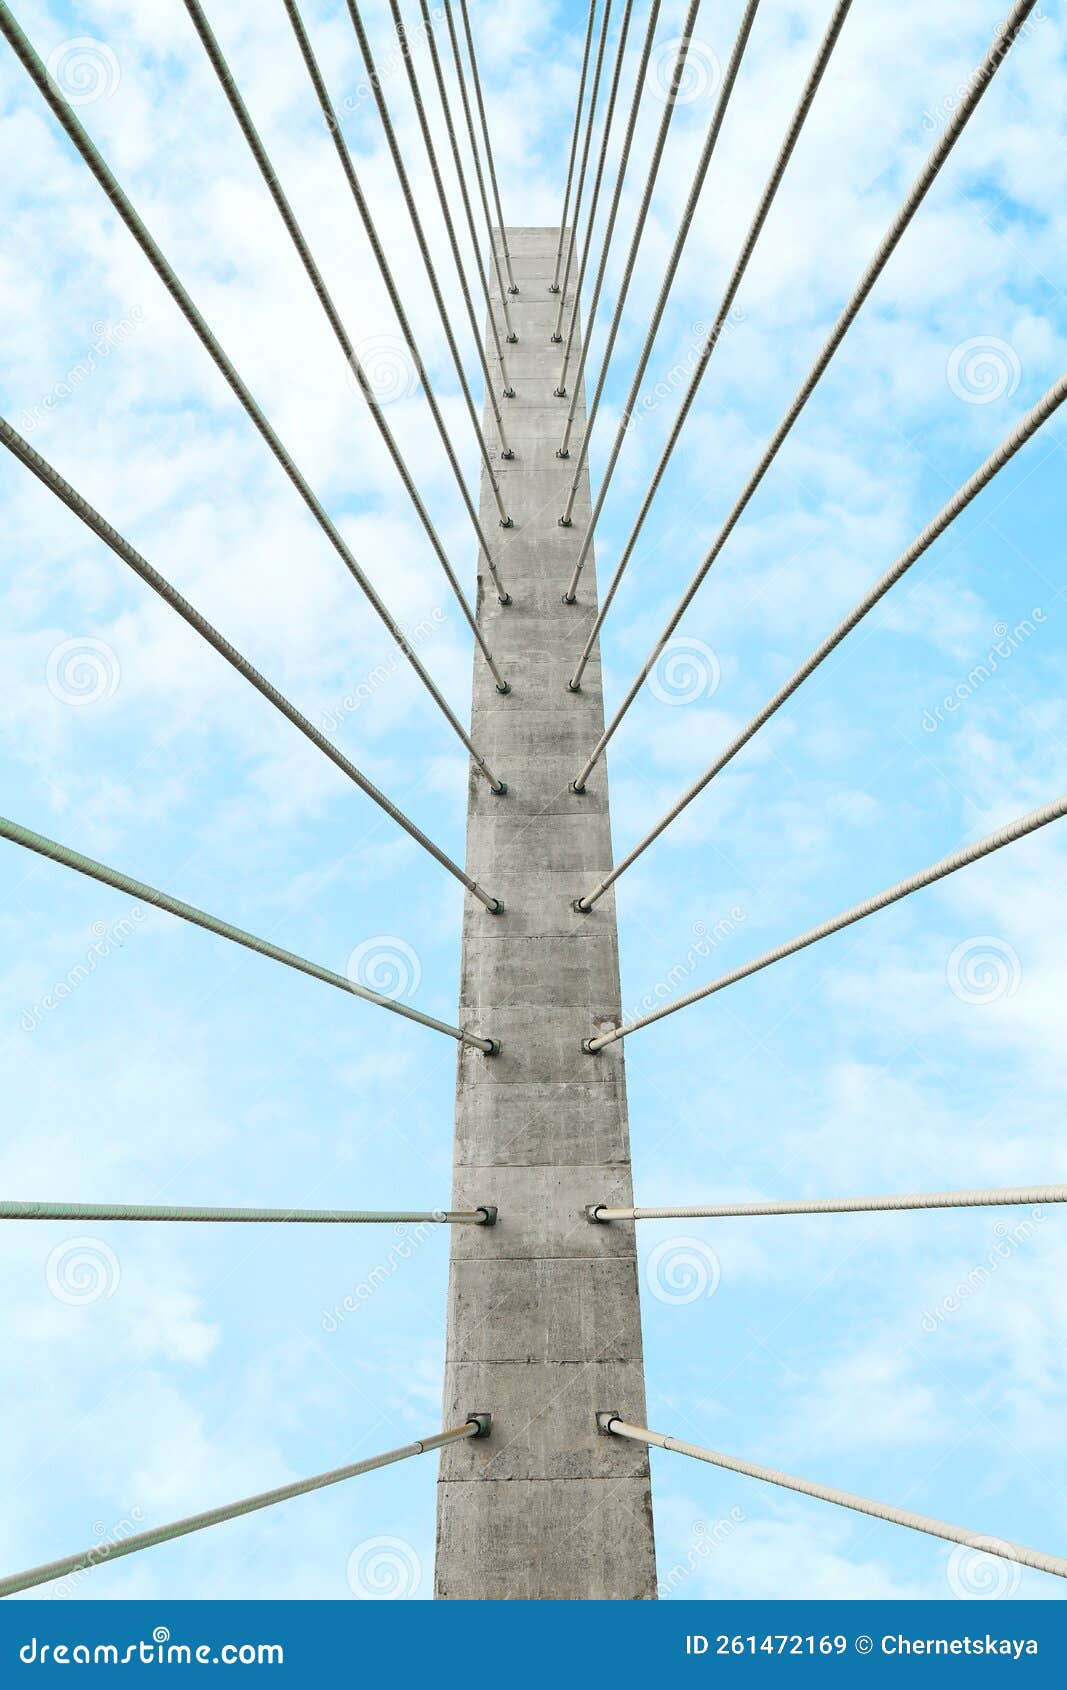 beautiful modern bridge against blue cloudy sky, low angle view